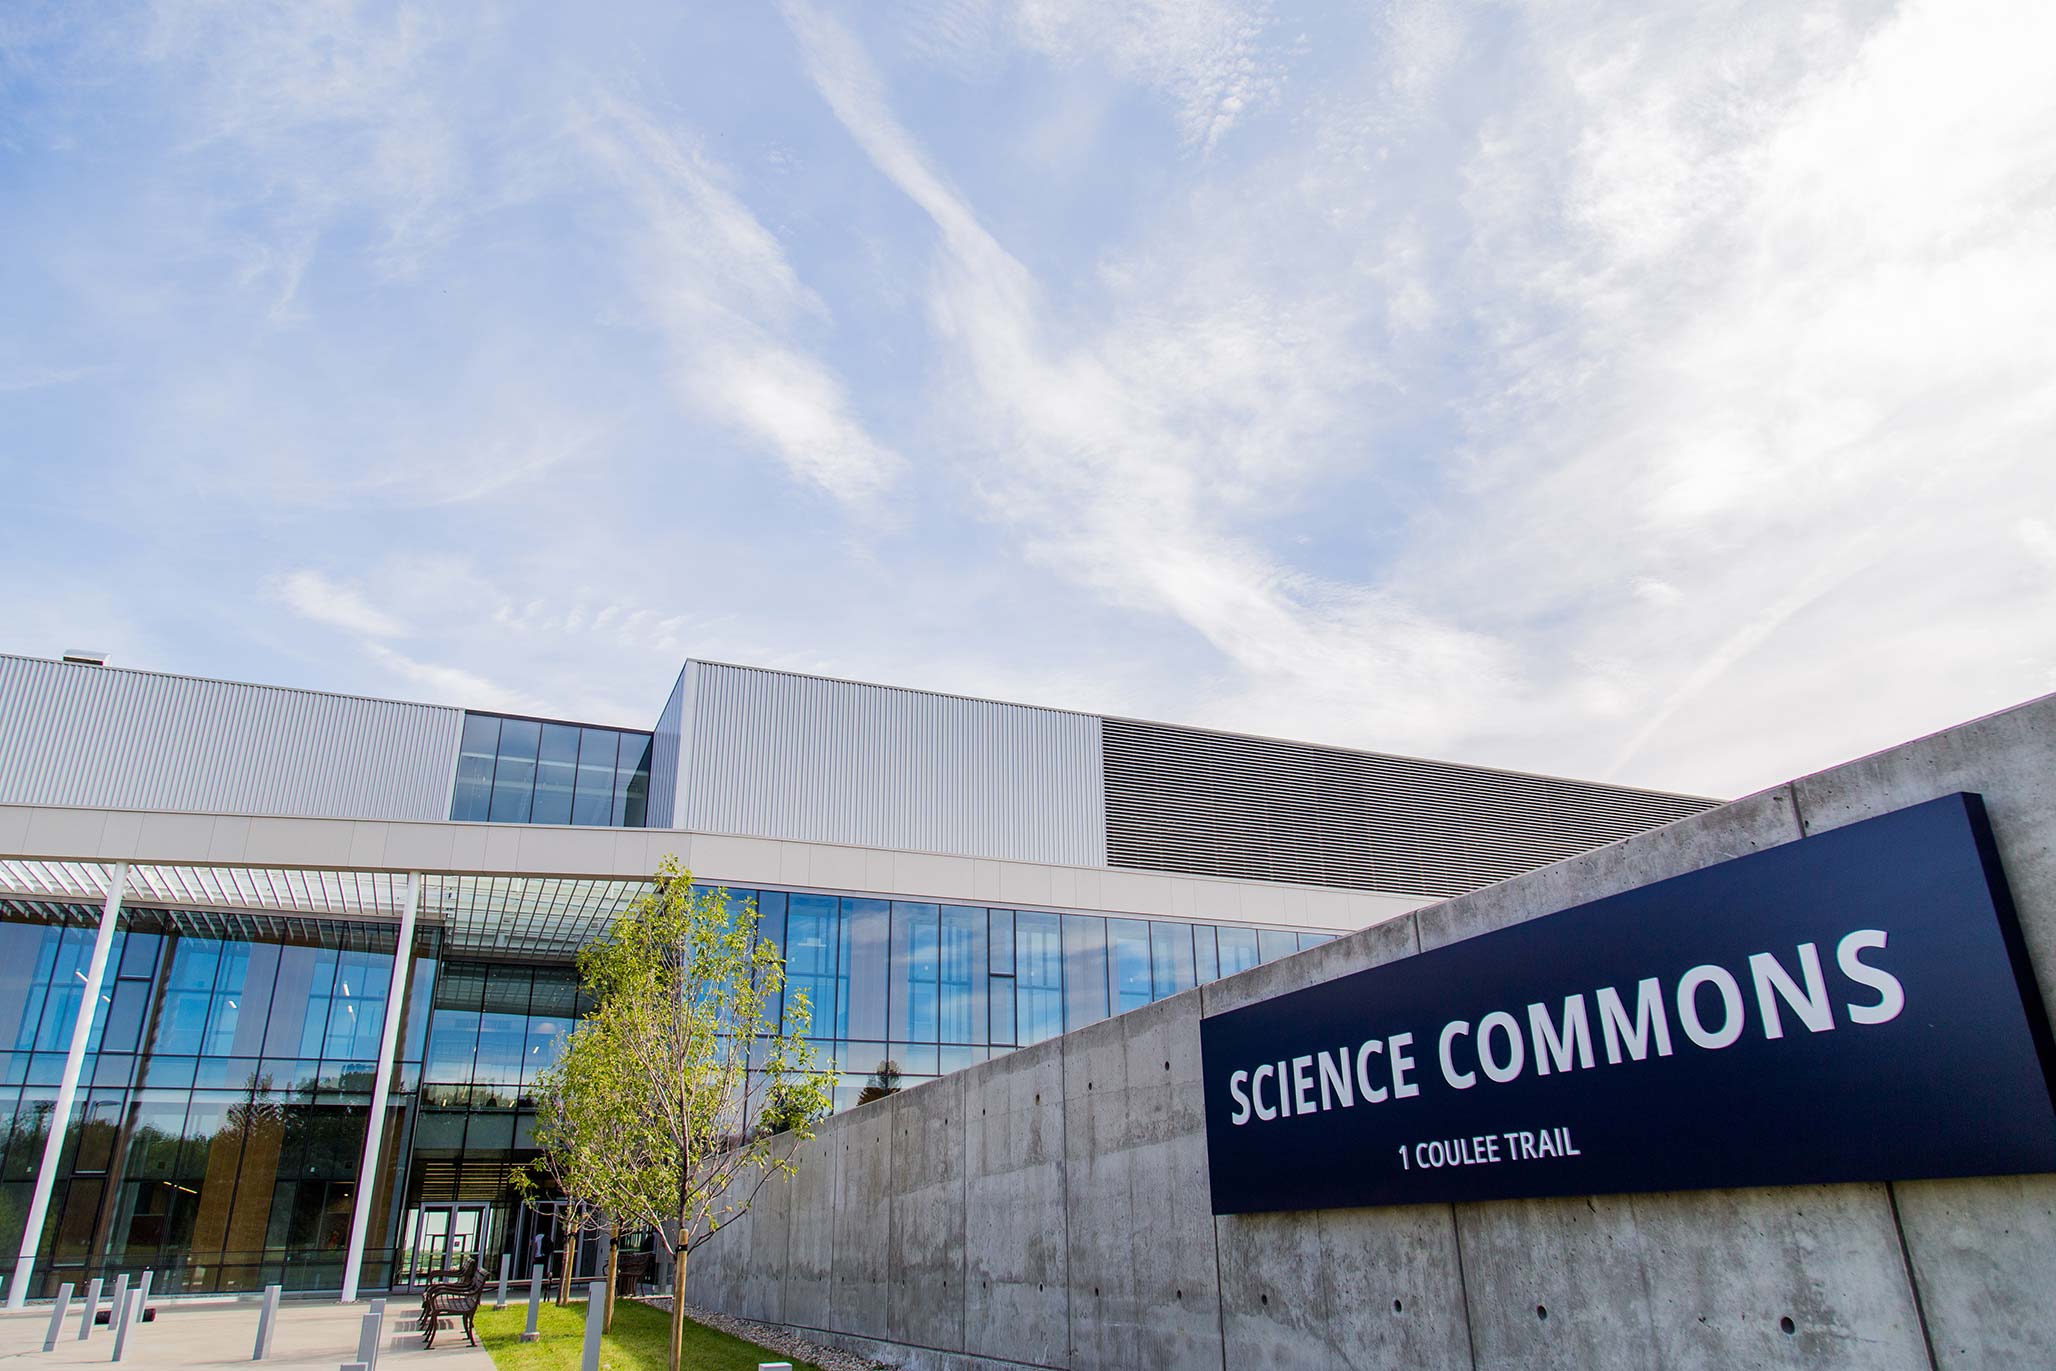 Science Commons building sign